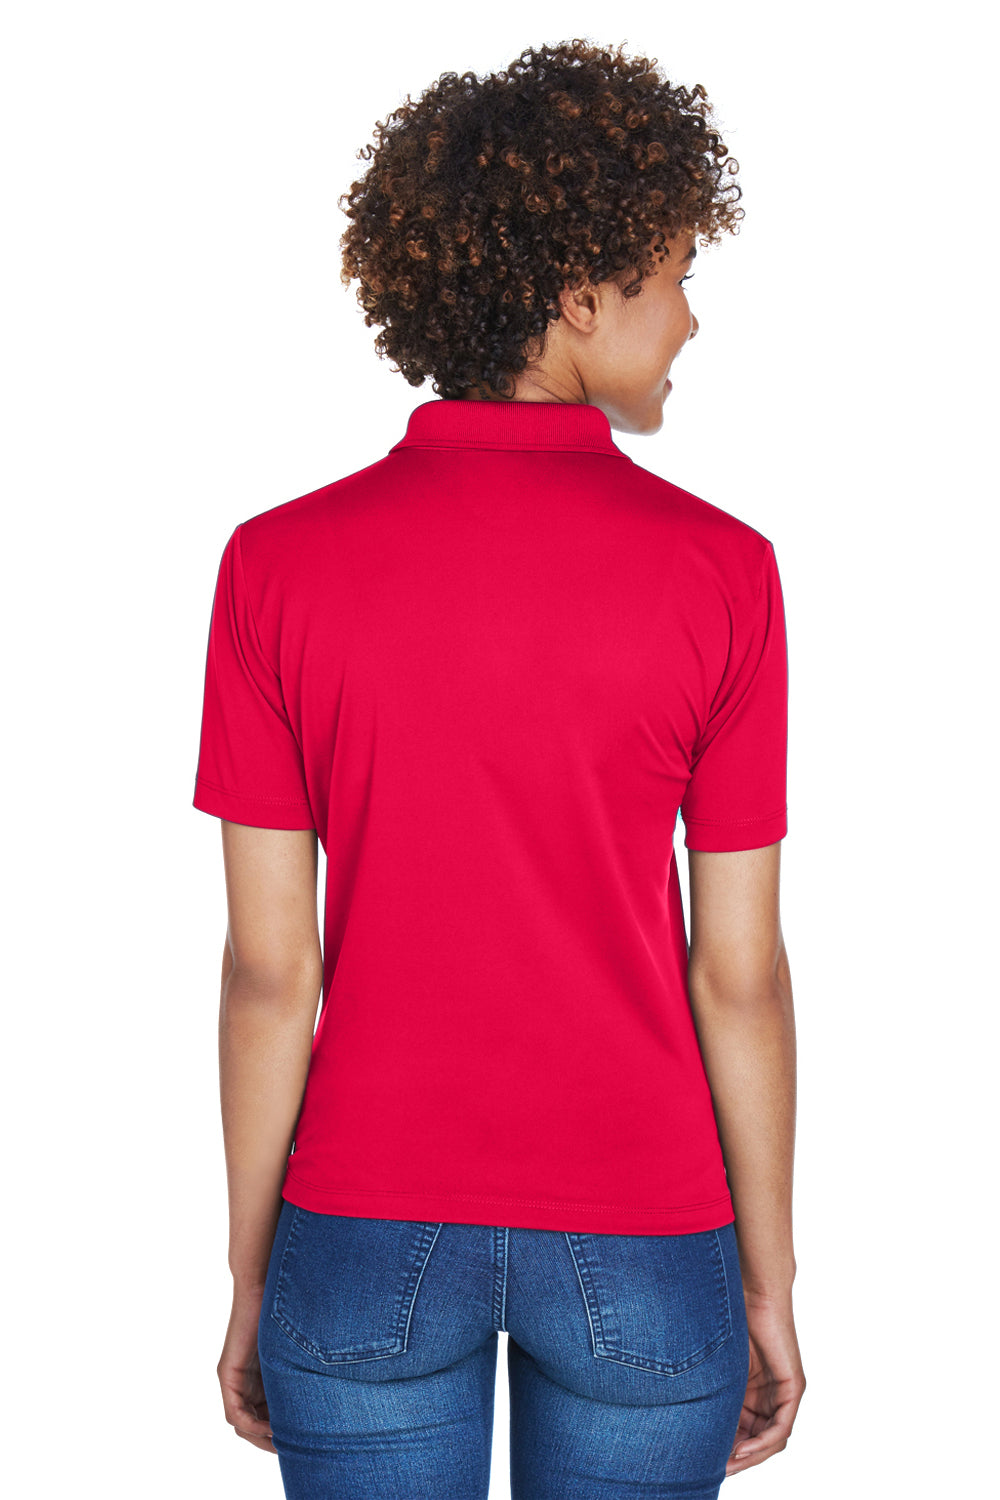 UltraClub 8610L Womens Cool & Dry 8 Star Elite Performance Moisture Wicking Short Sleeve Polo Shirt Red Back